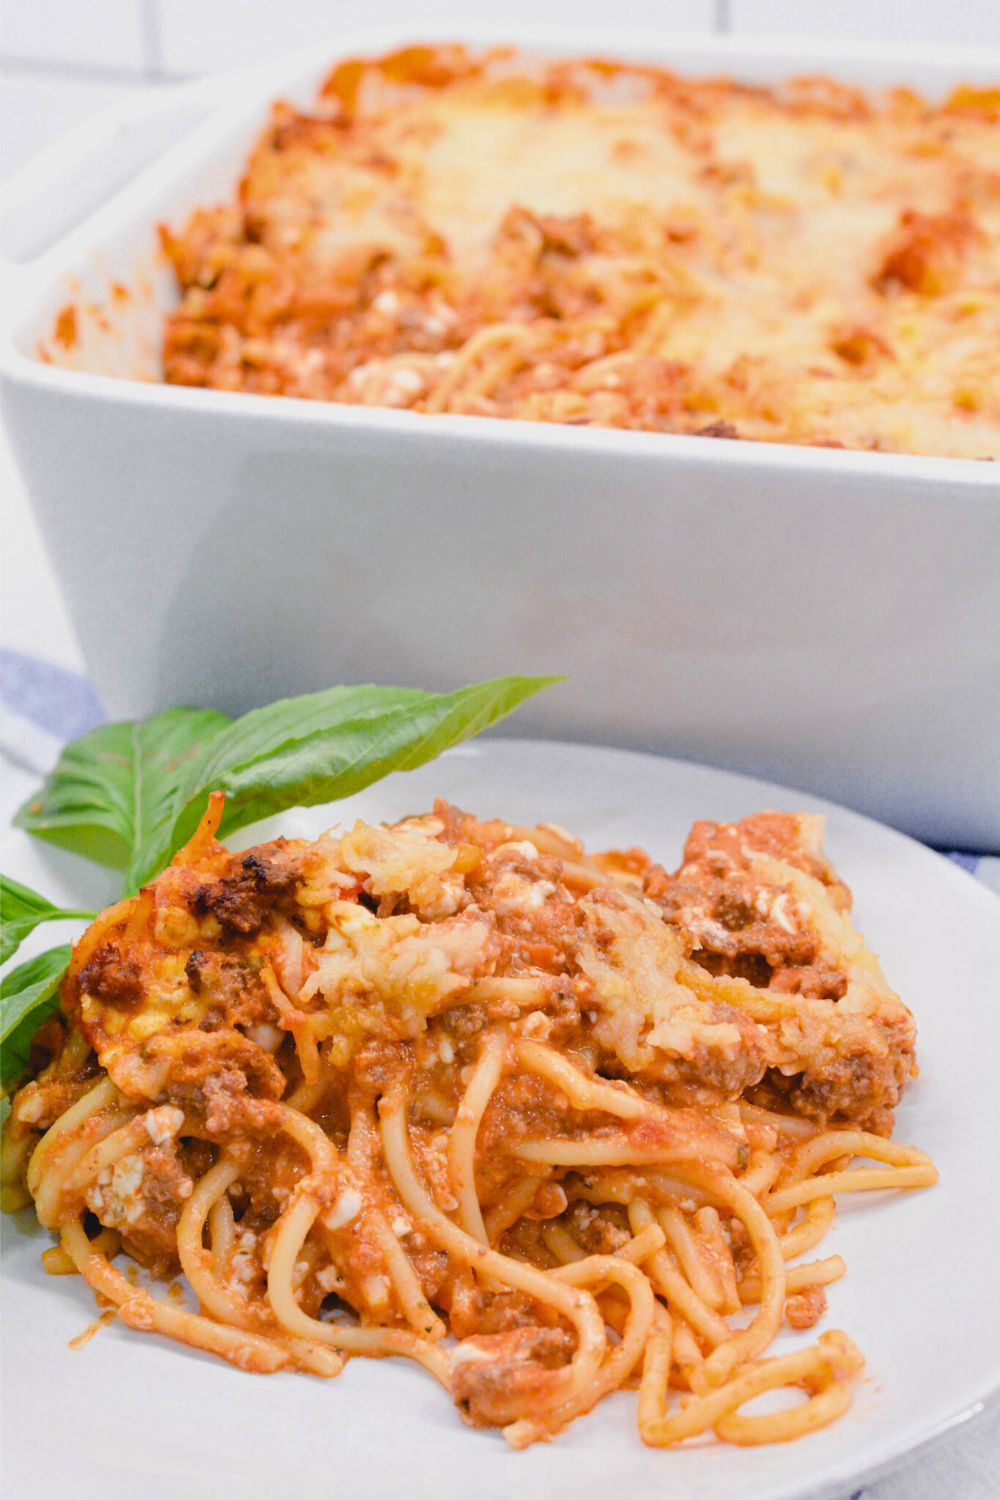 For a twist to the normal spaghetti and meatballs, try this creamy, 3 cheese baked spaghetti recipe on a quick weeknight dinner.